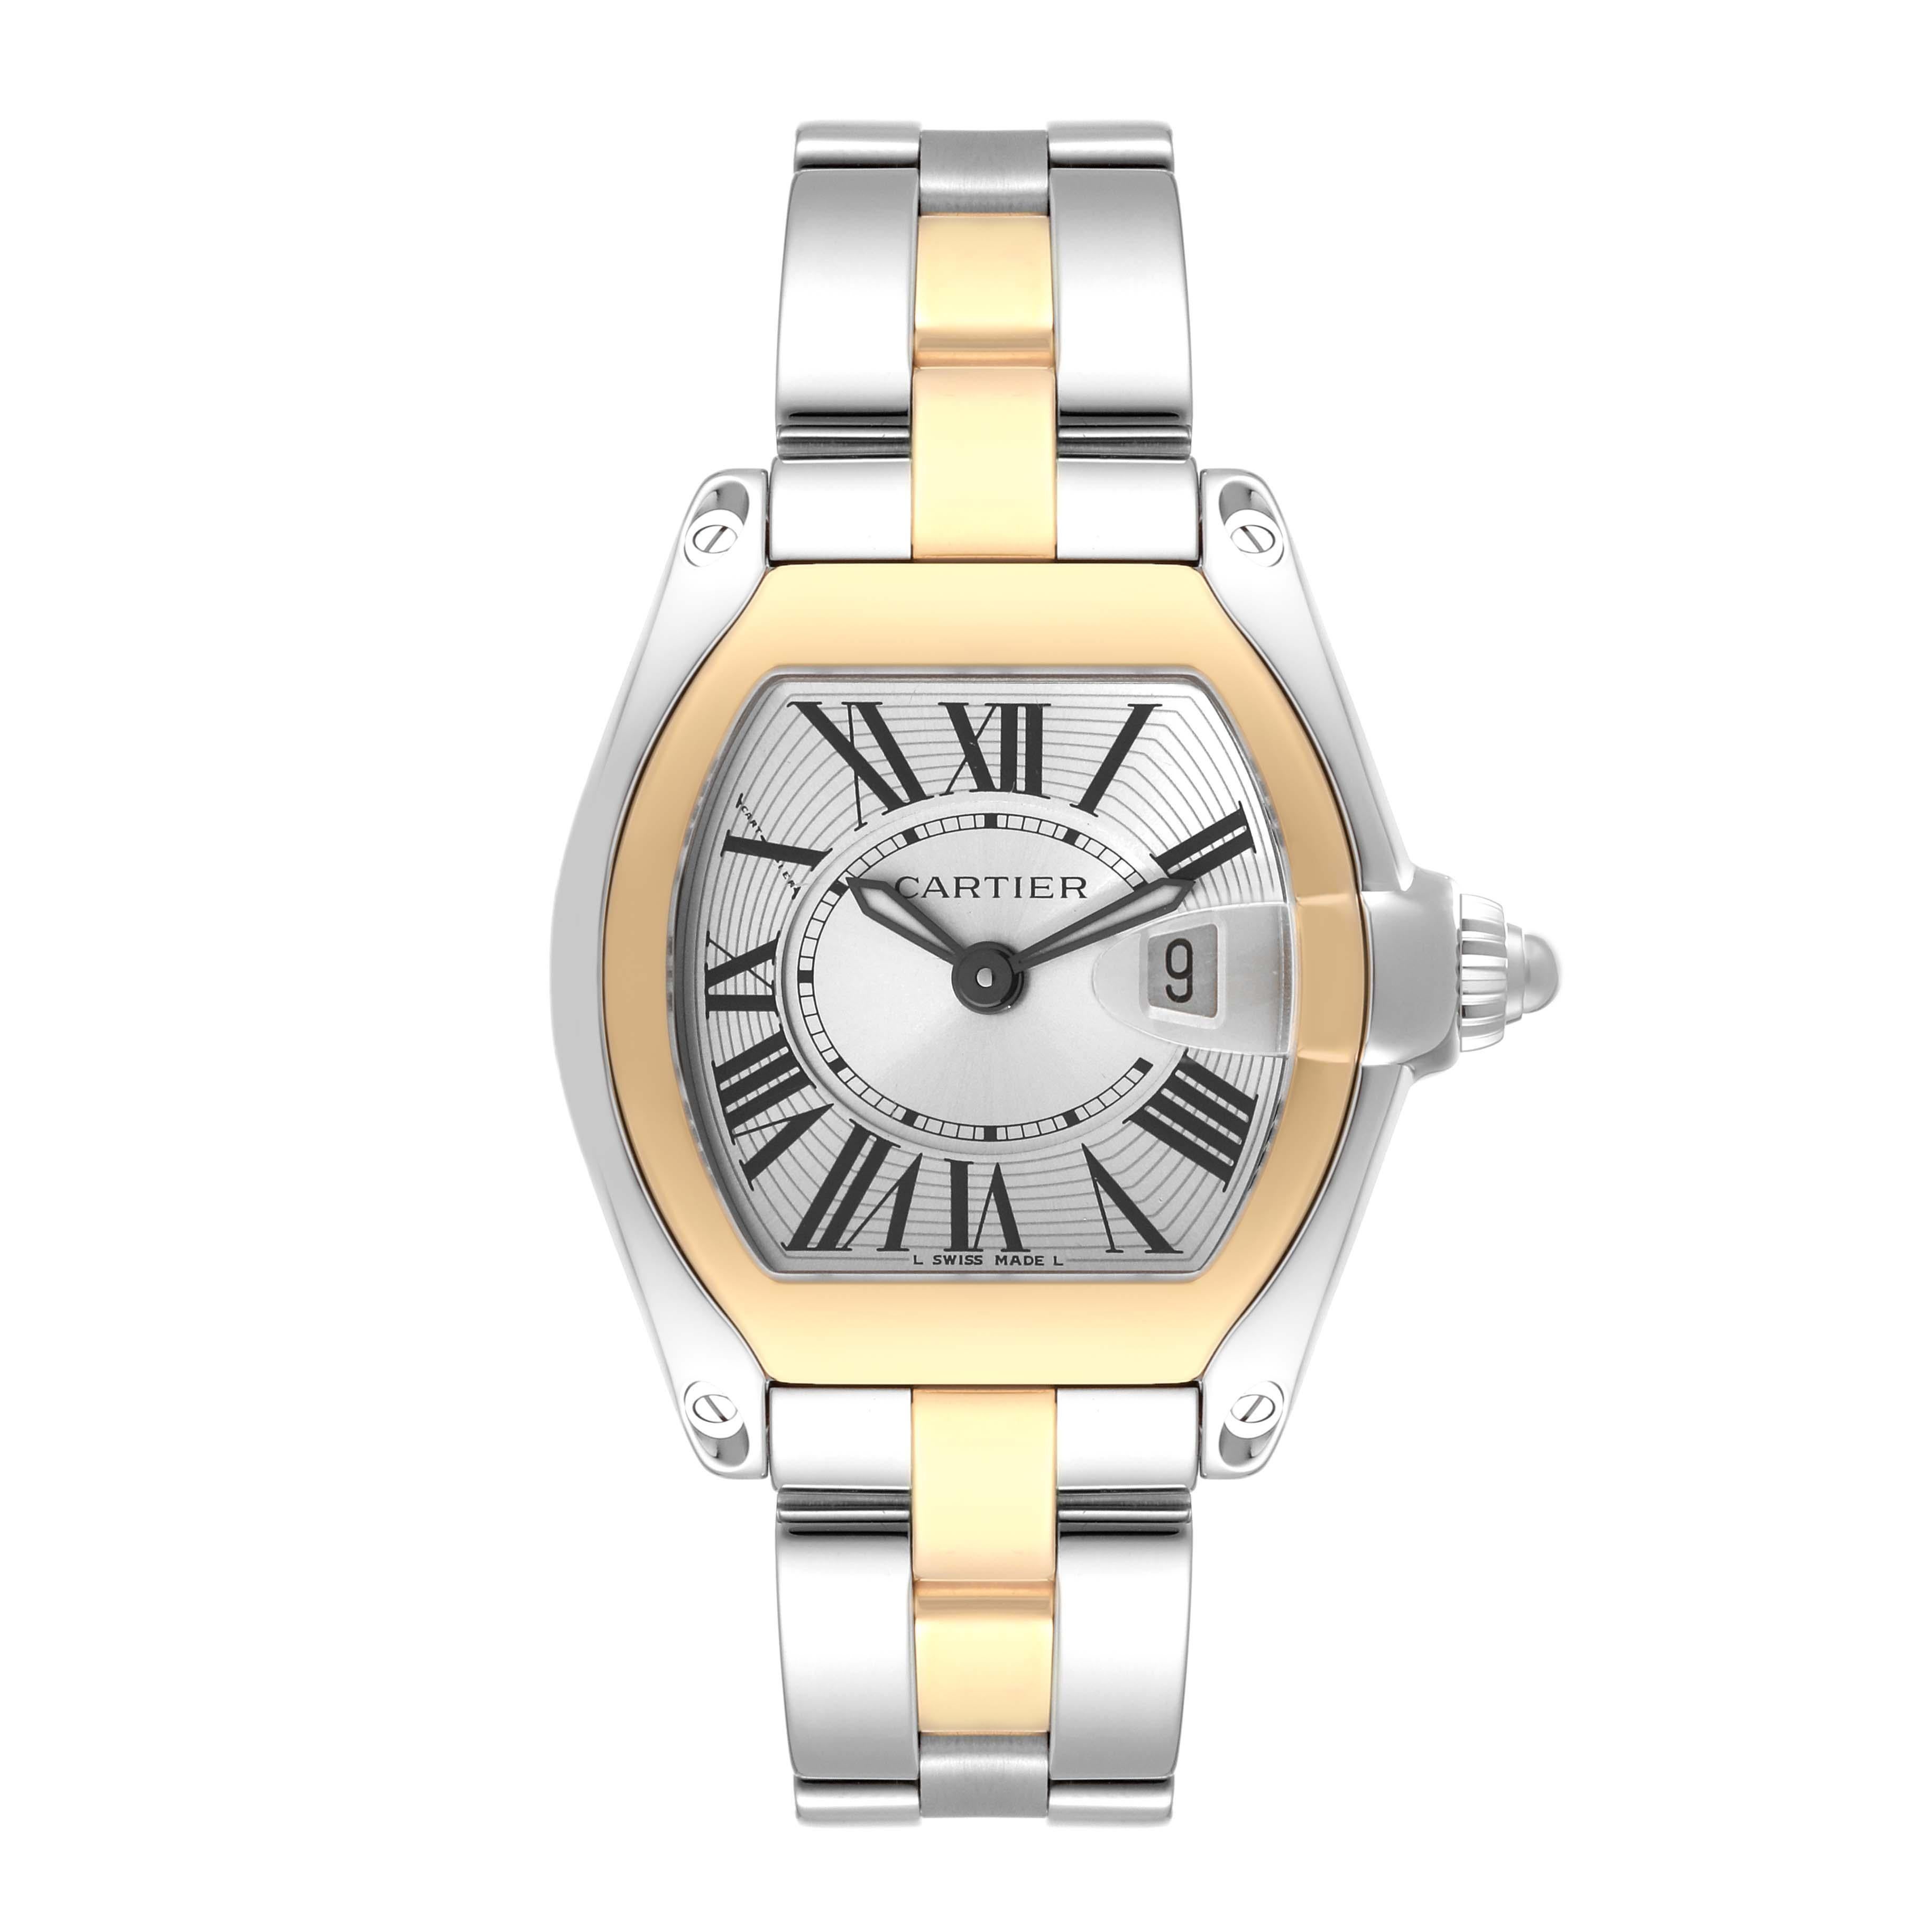 Cartier Roadster Steel Yellow Gold Ladies Watch W62026Y4. Swiss quartz movement. Calibre 688. Stainless steel and 18K yellow gold tonneau shaped case 36 x 30 mm. . Scratch resistant sapphire crystal with cyclops magnifying glass. Silver sunray